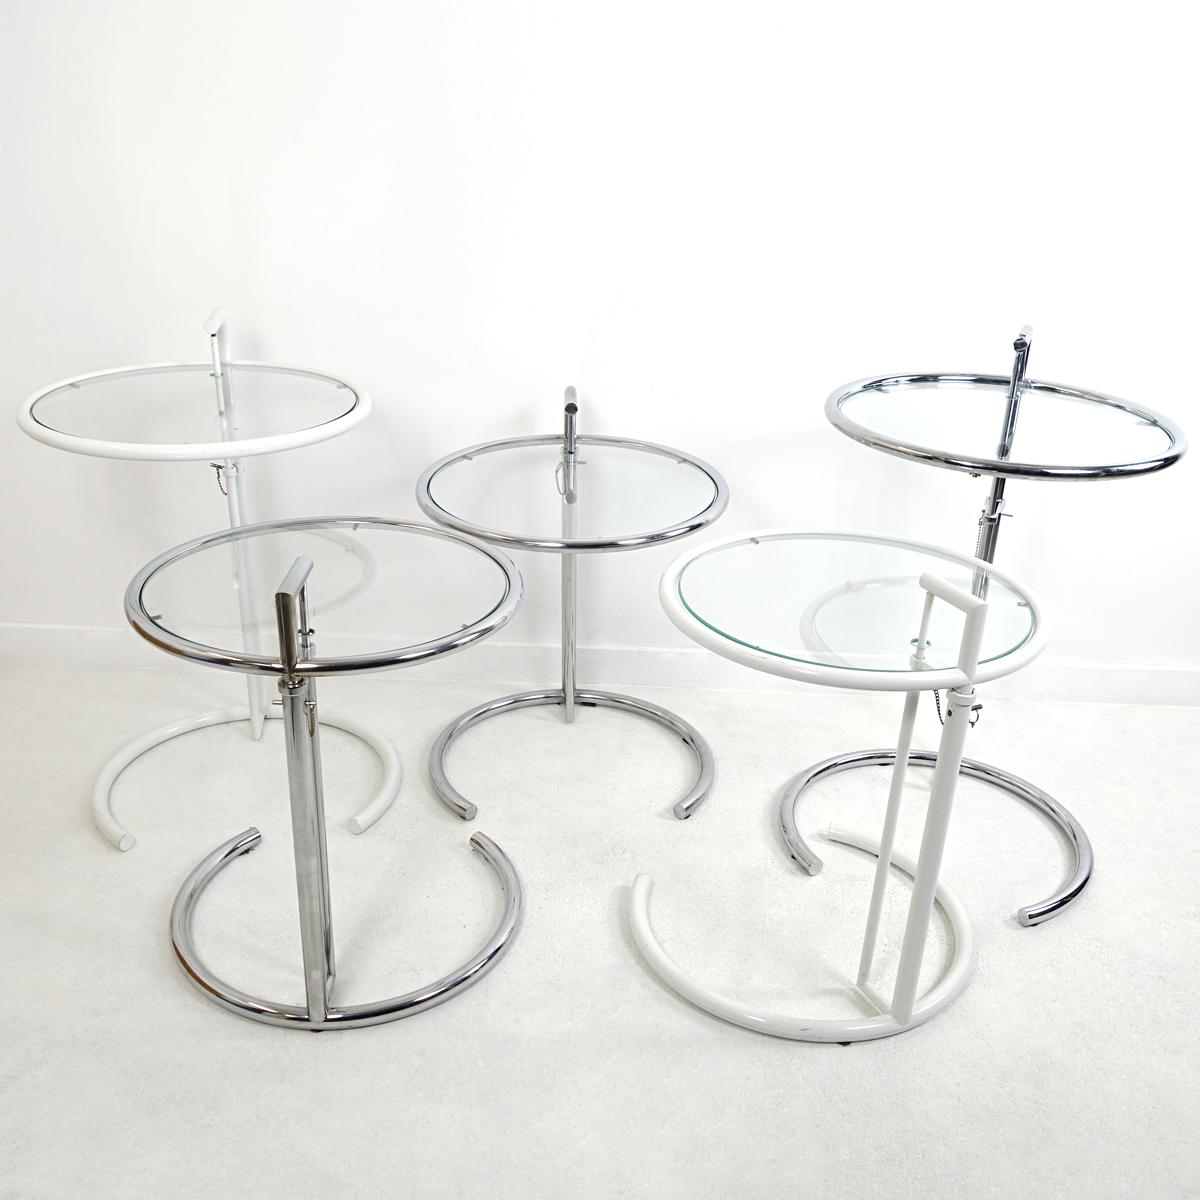 Modernist Chrome Tubular Side Table E1027 by Eileen Gray for Classicon 1